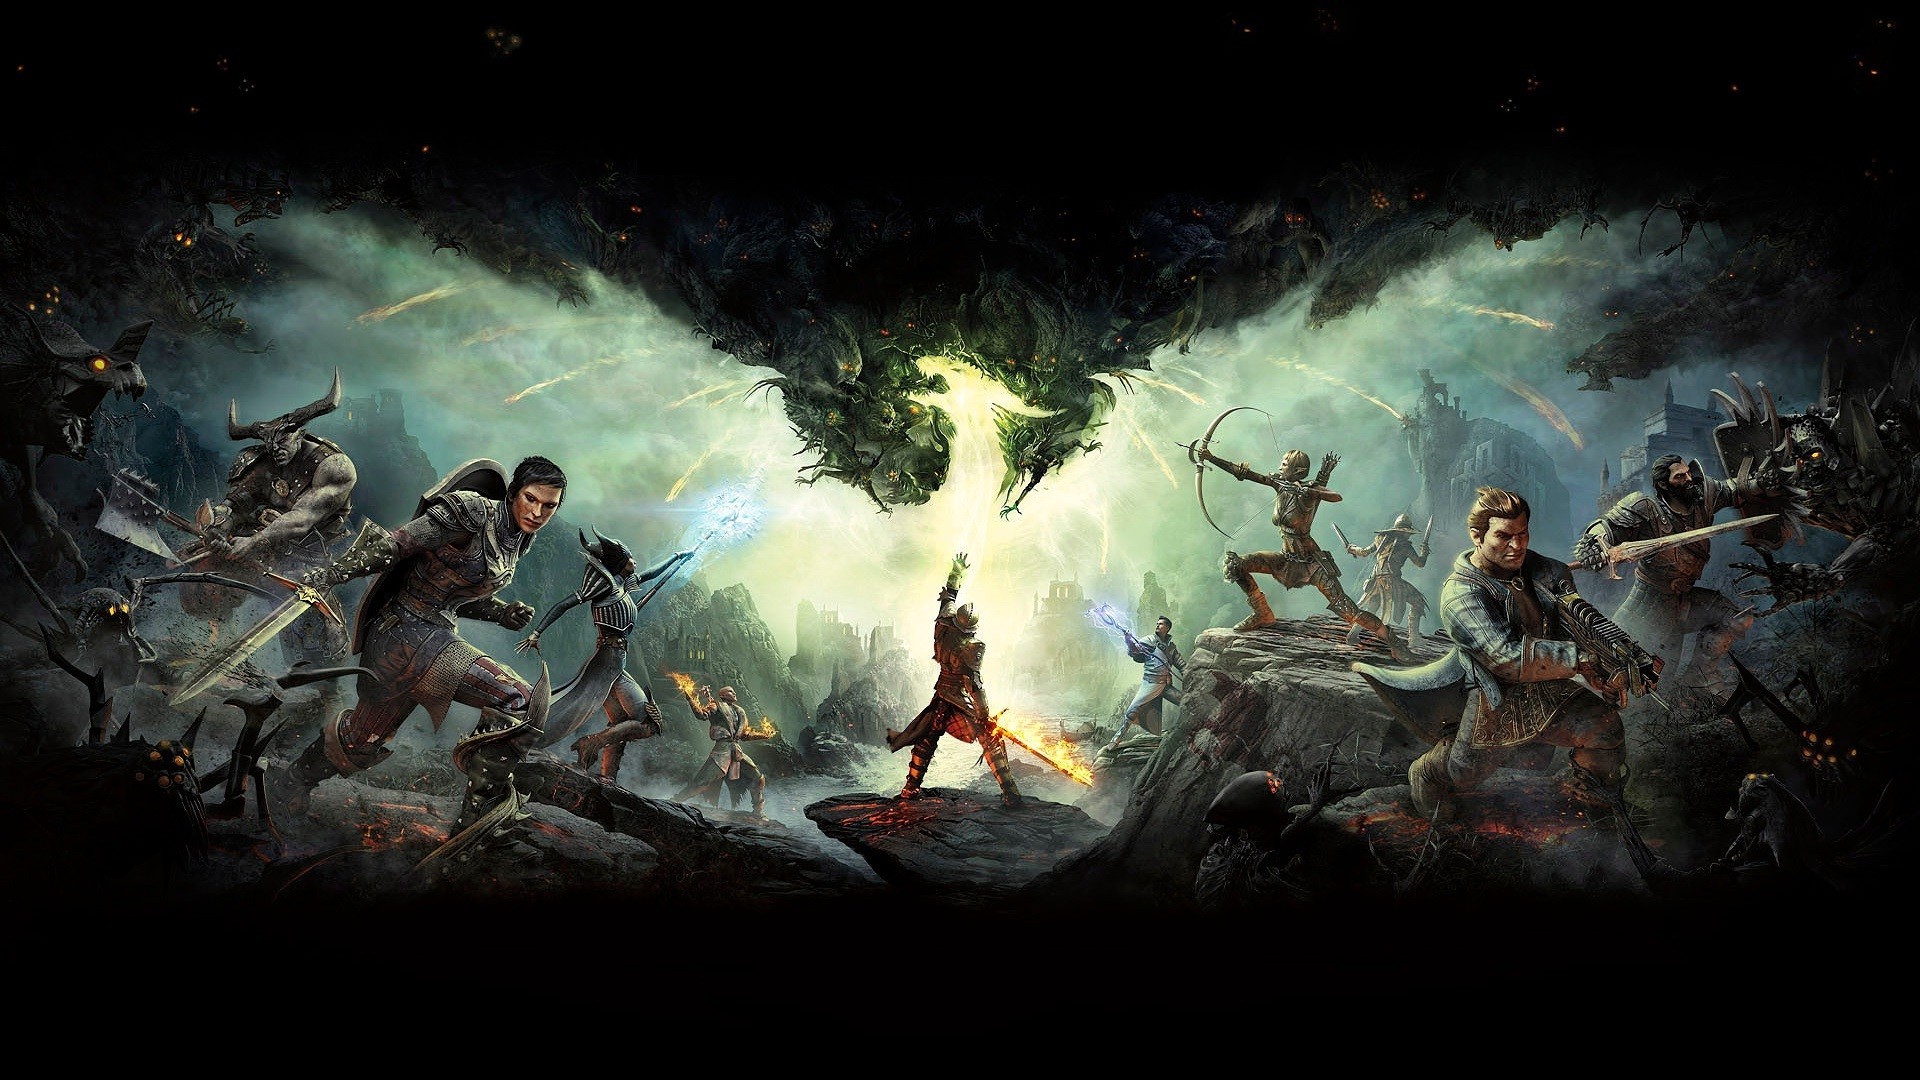 Great Dragon Age Inquisition Wallpaper Full HD Pictures